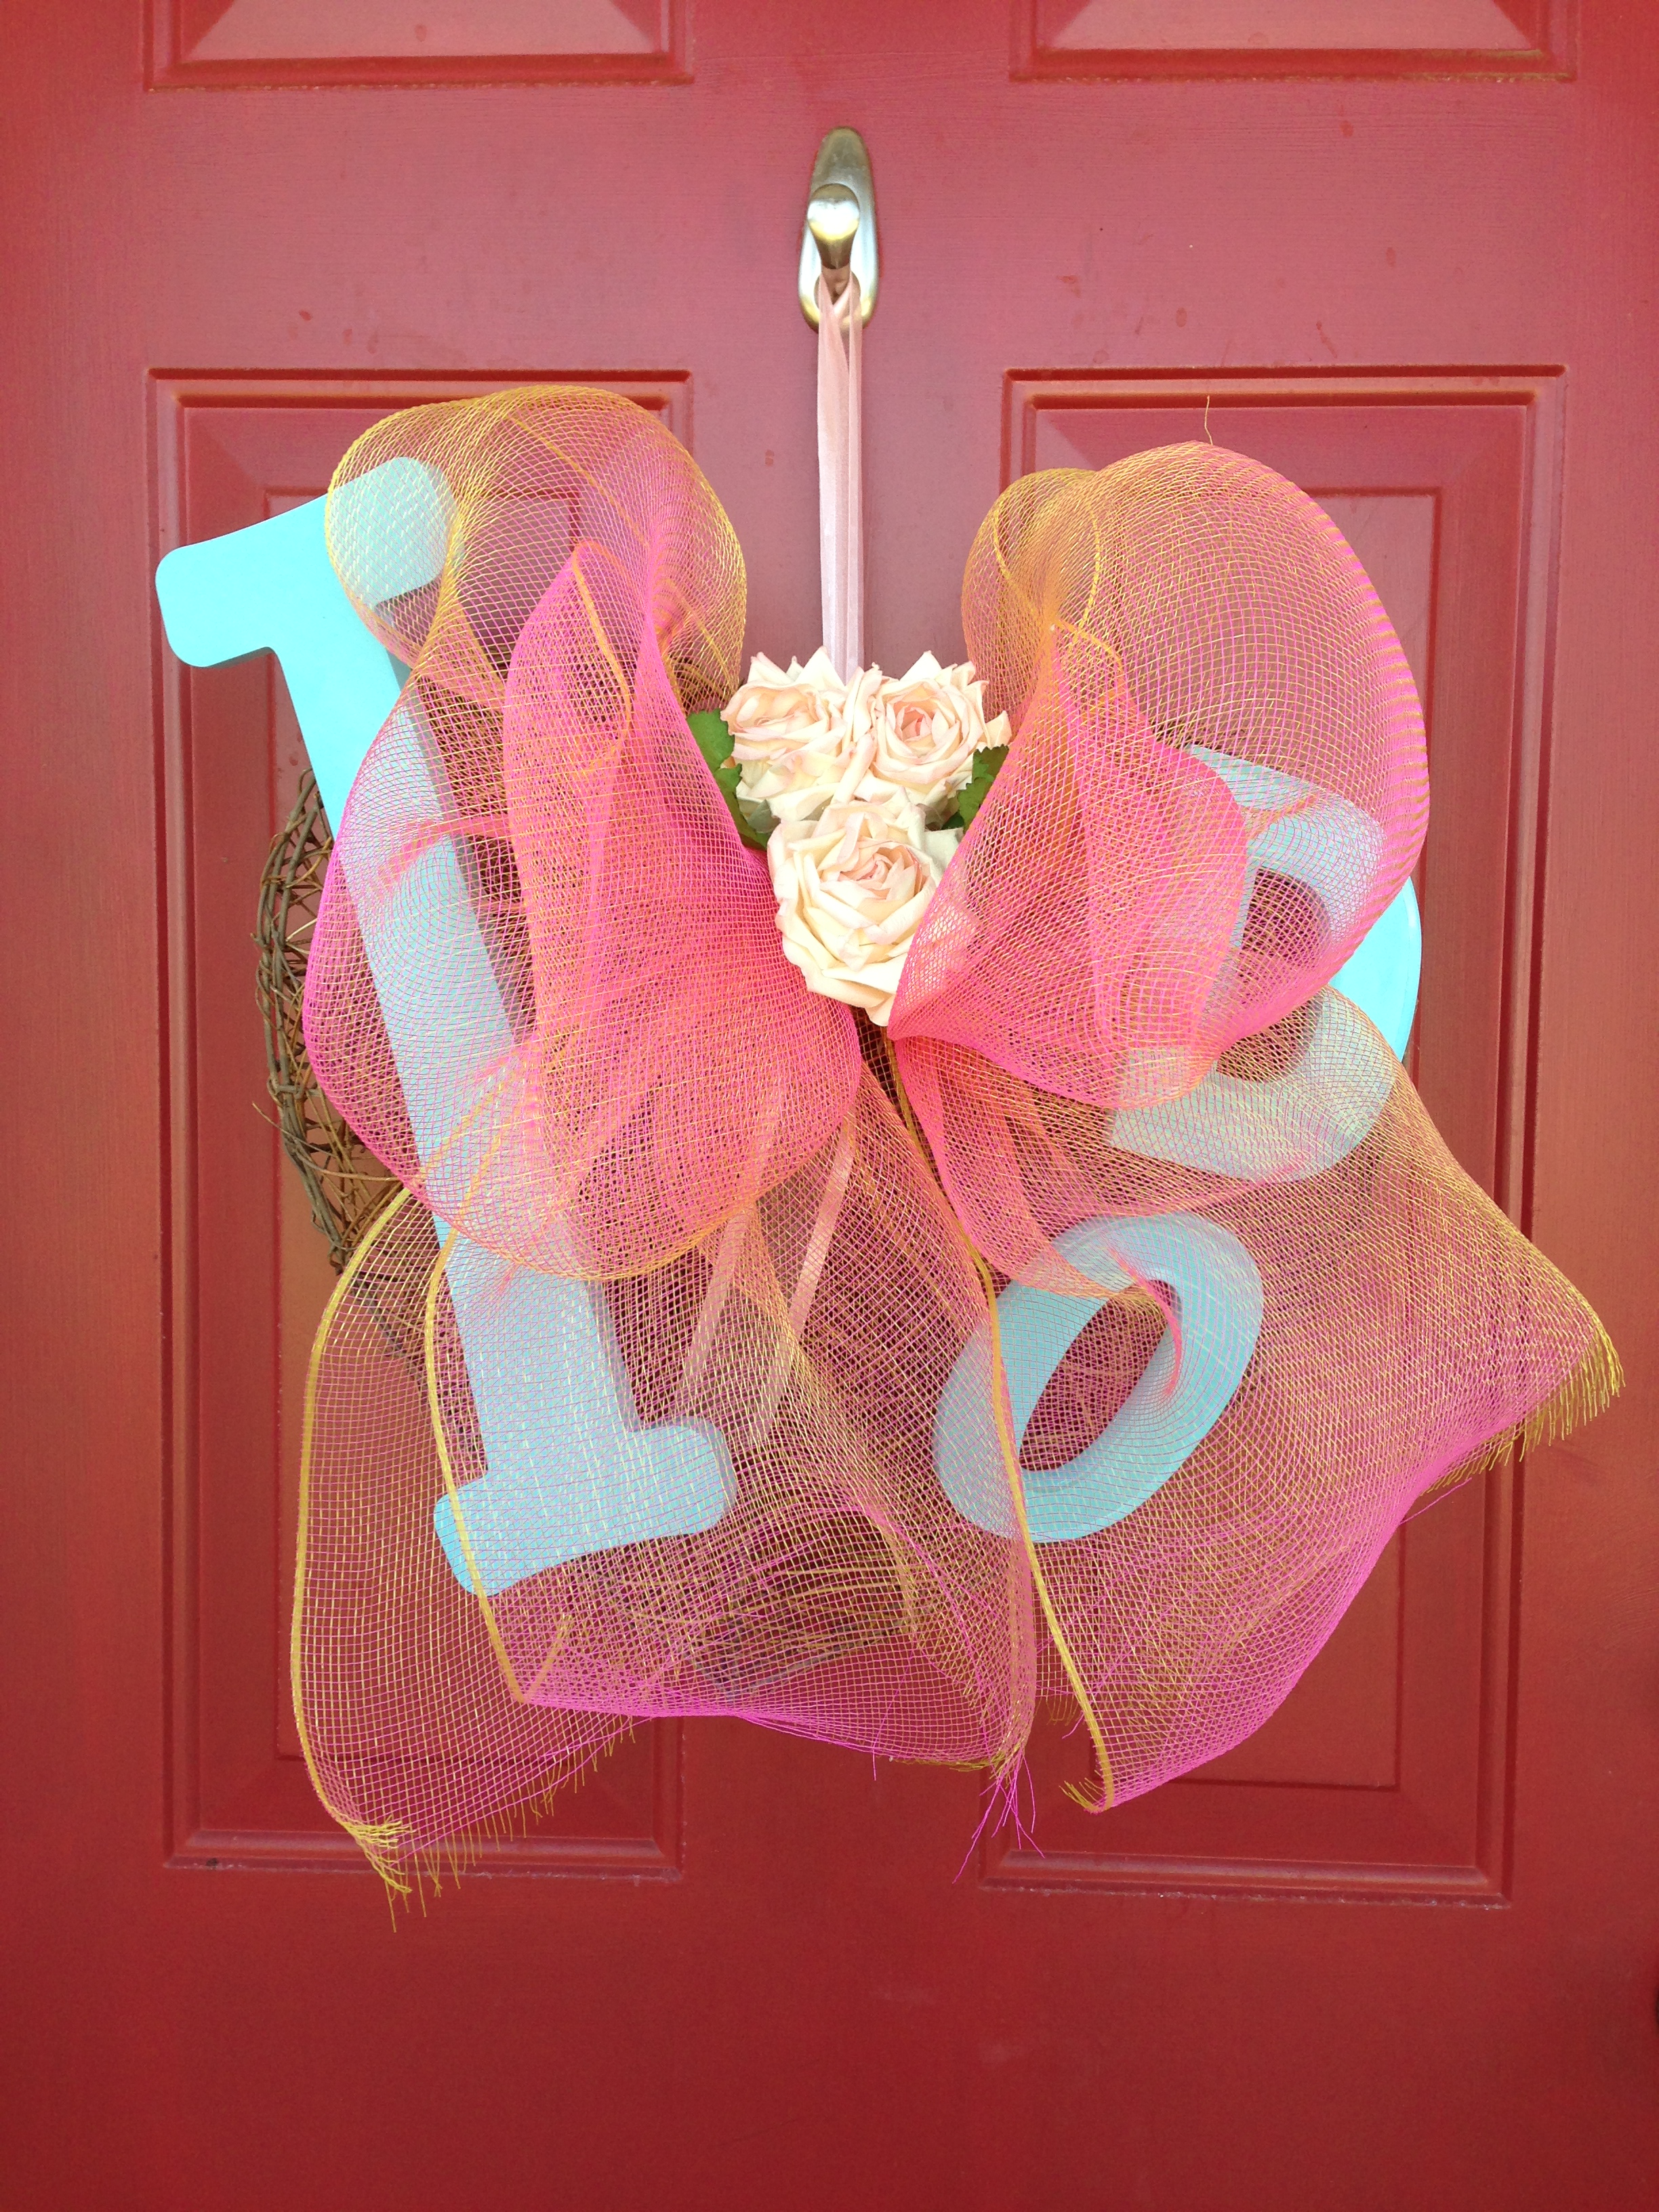 Easy DIY Bridal Shower Ideas from Pinterest \u2013 Welcome to The Adored Home